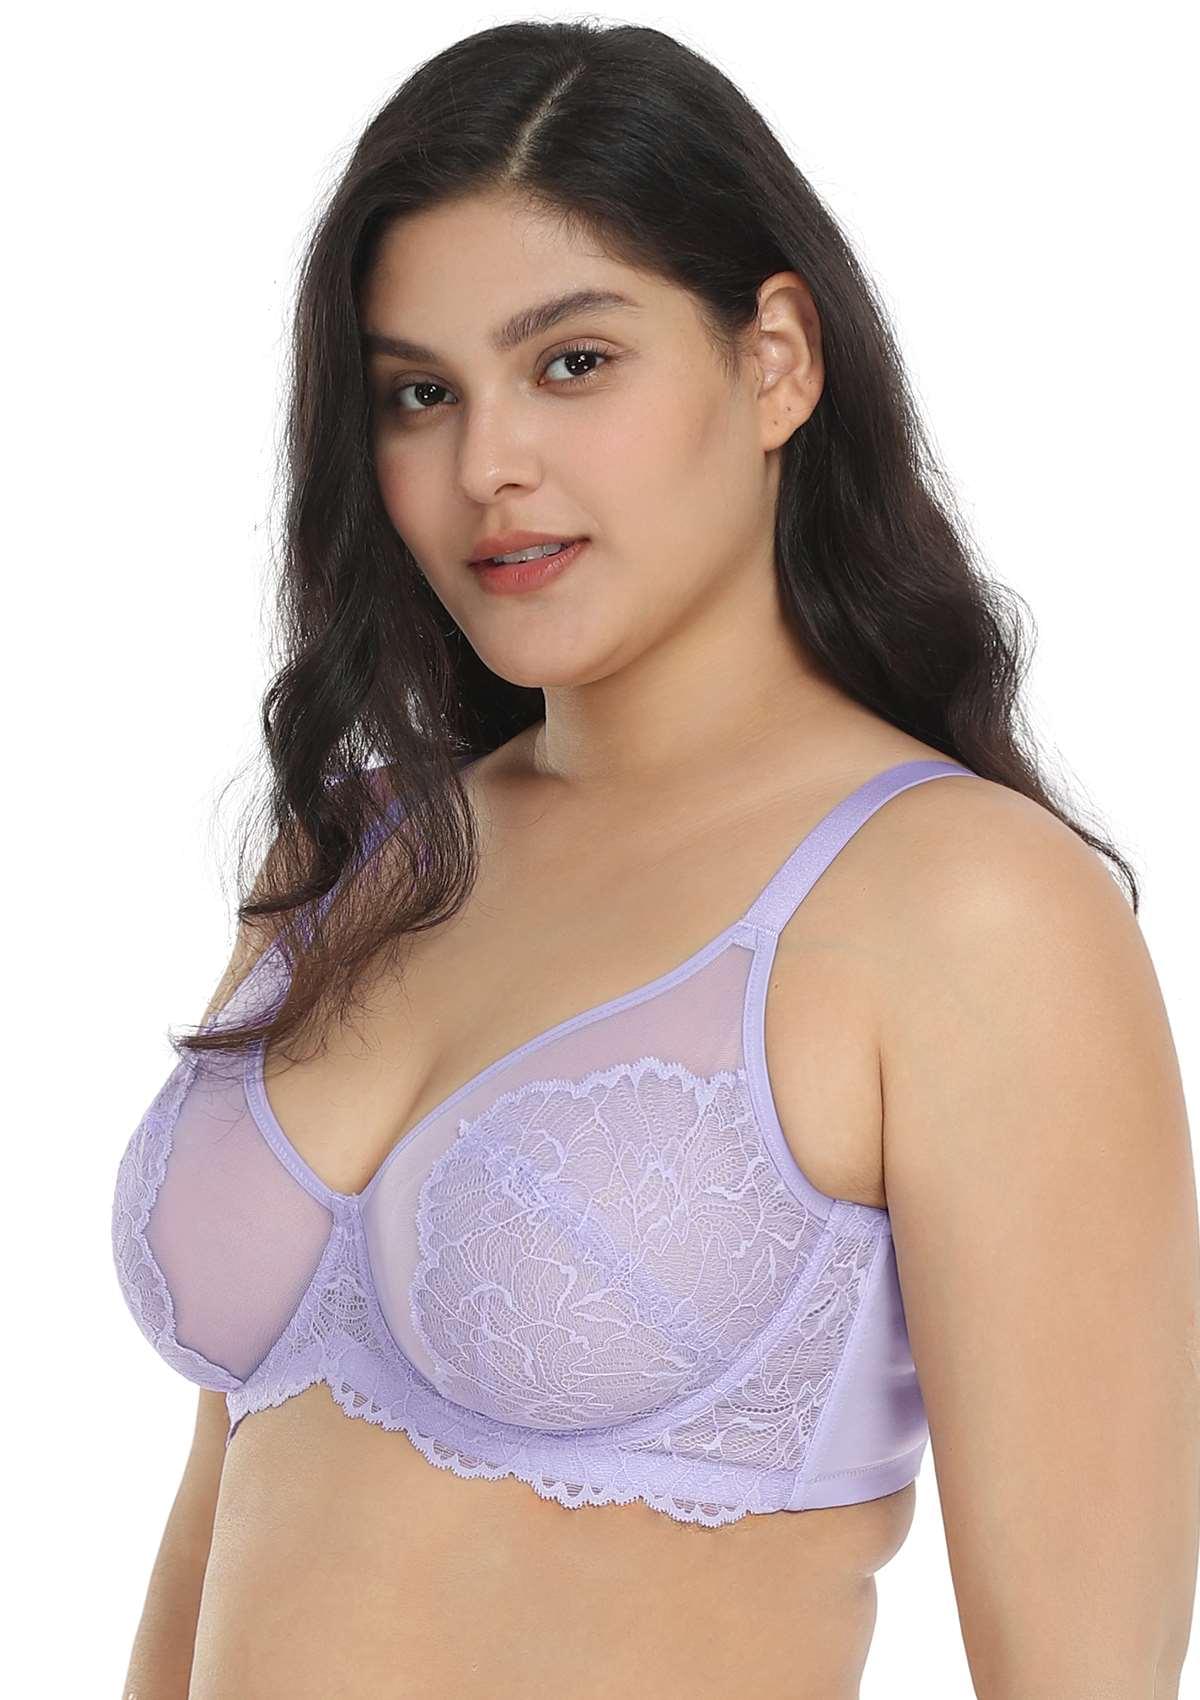 HSIA Blossom Transparent Lace Bra: Plus Size Wired Back Smoothing Bra - Light Purple / 42 / D